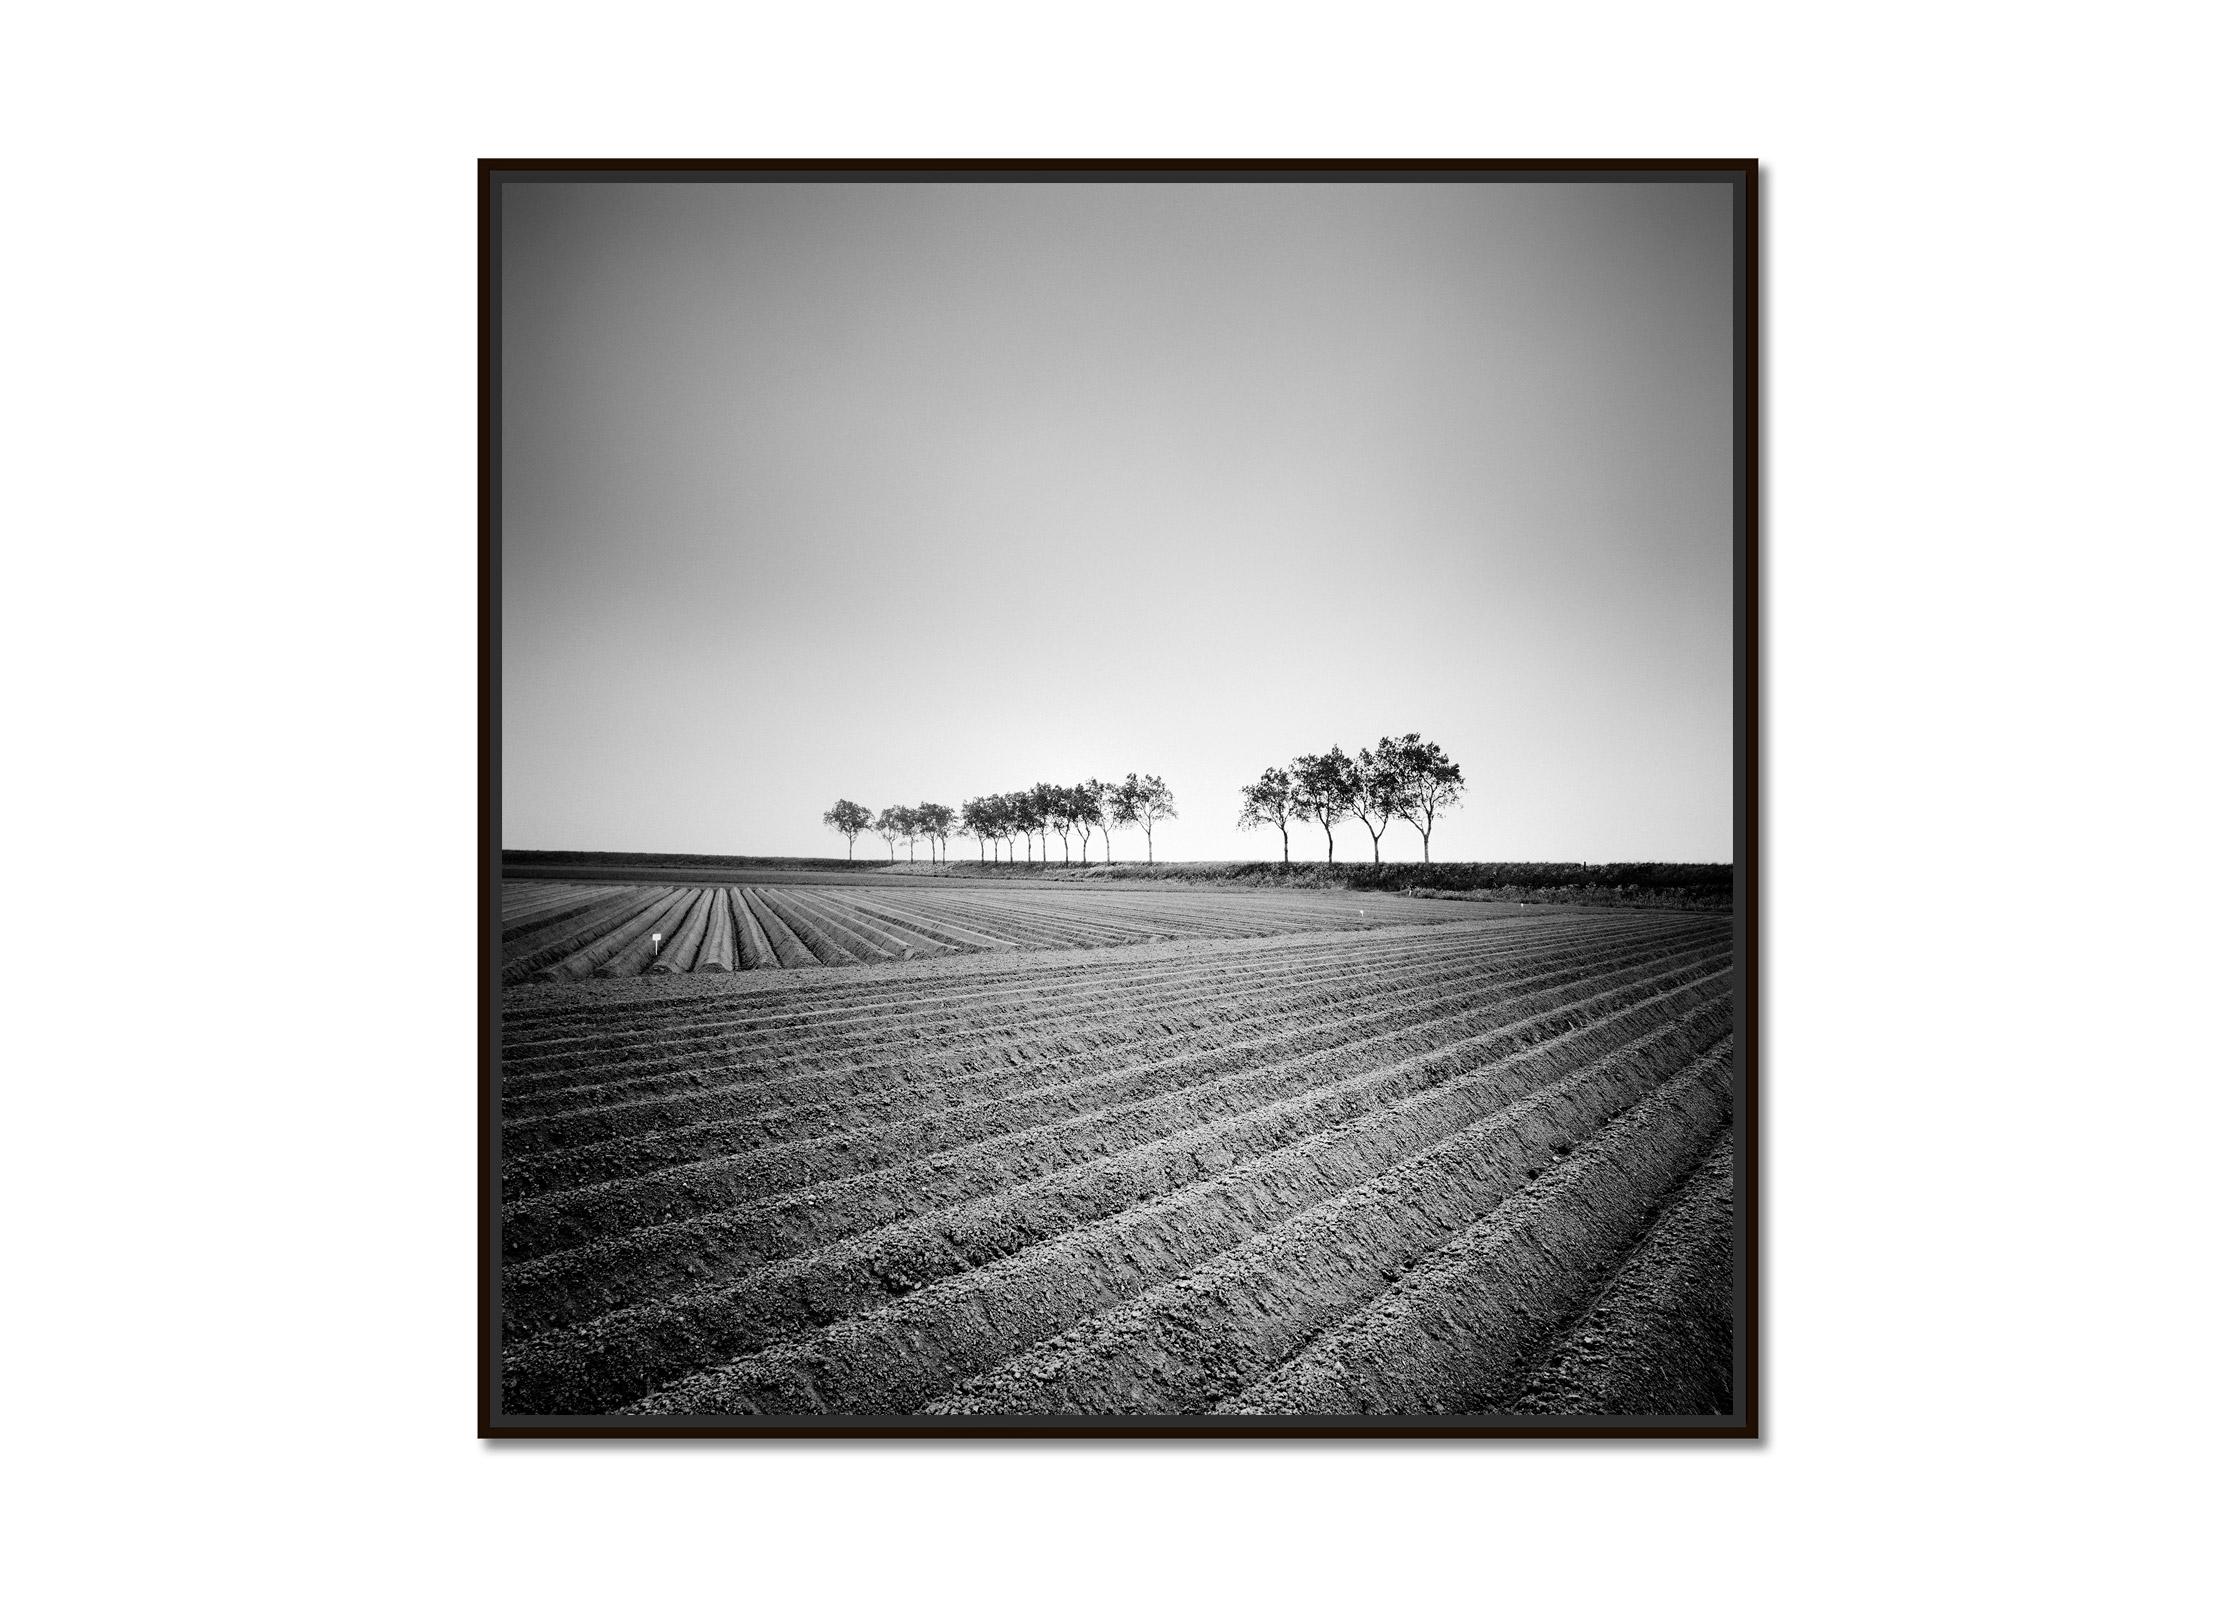 Asparagus Field, Tree Avenue, Netherlands, Black and White landscape photography - Photograph by Gerald Berghammer